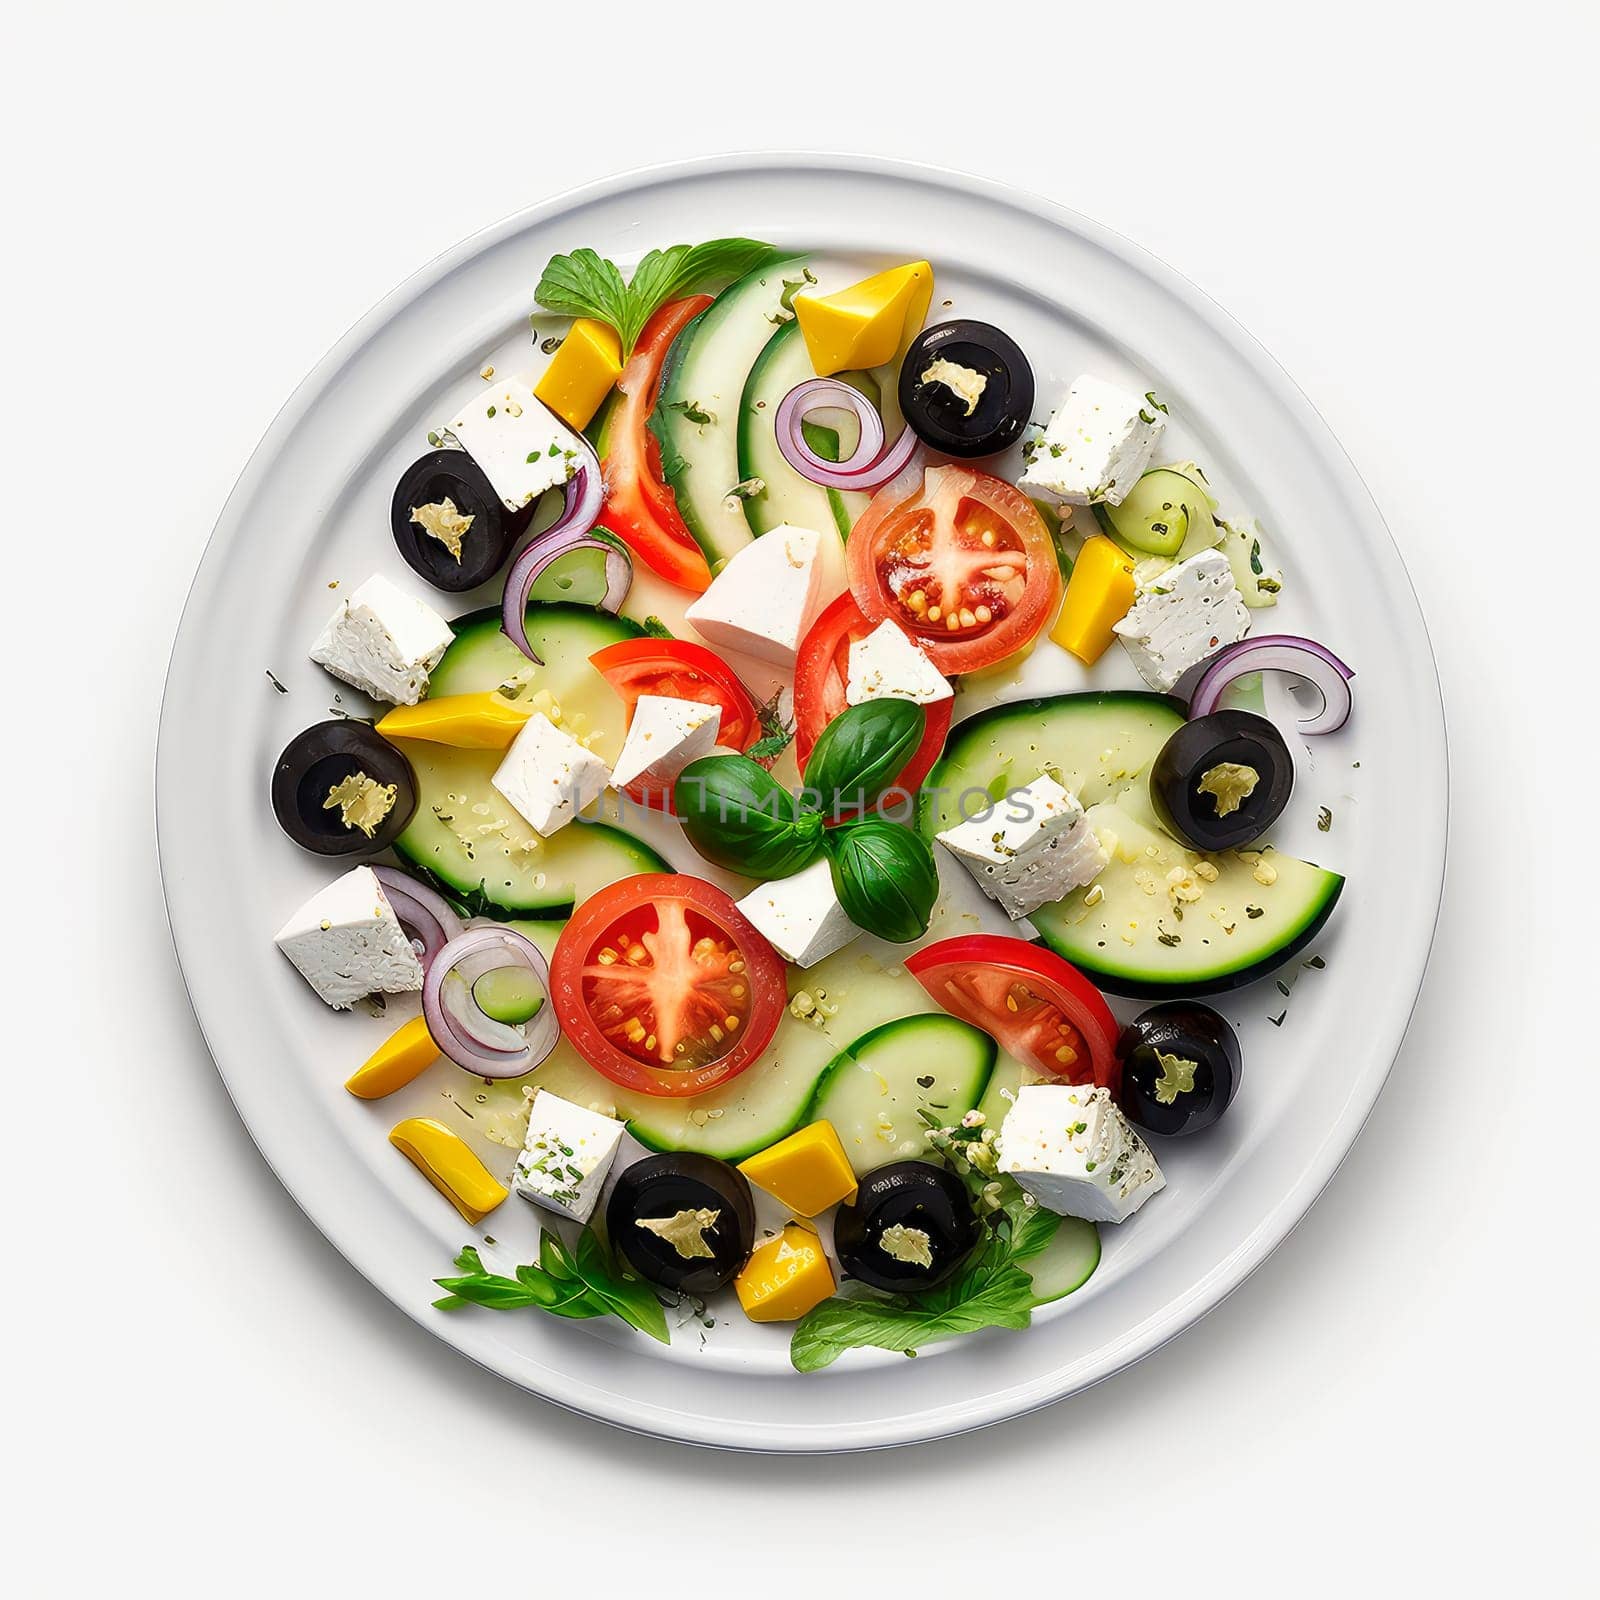 Greek salad on a plate isolate on a white background. by yanadjana